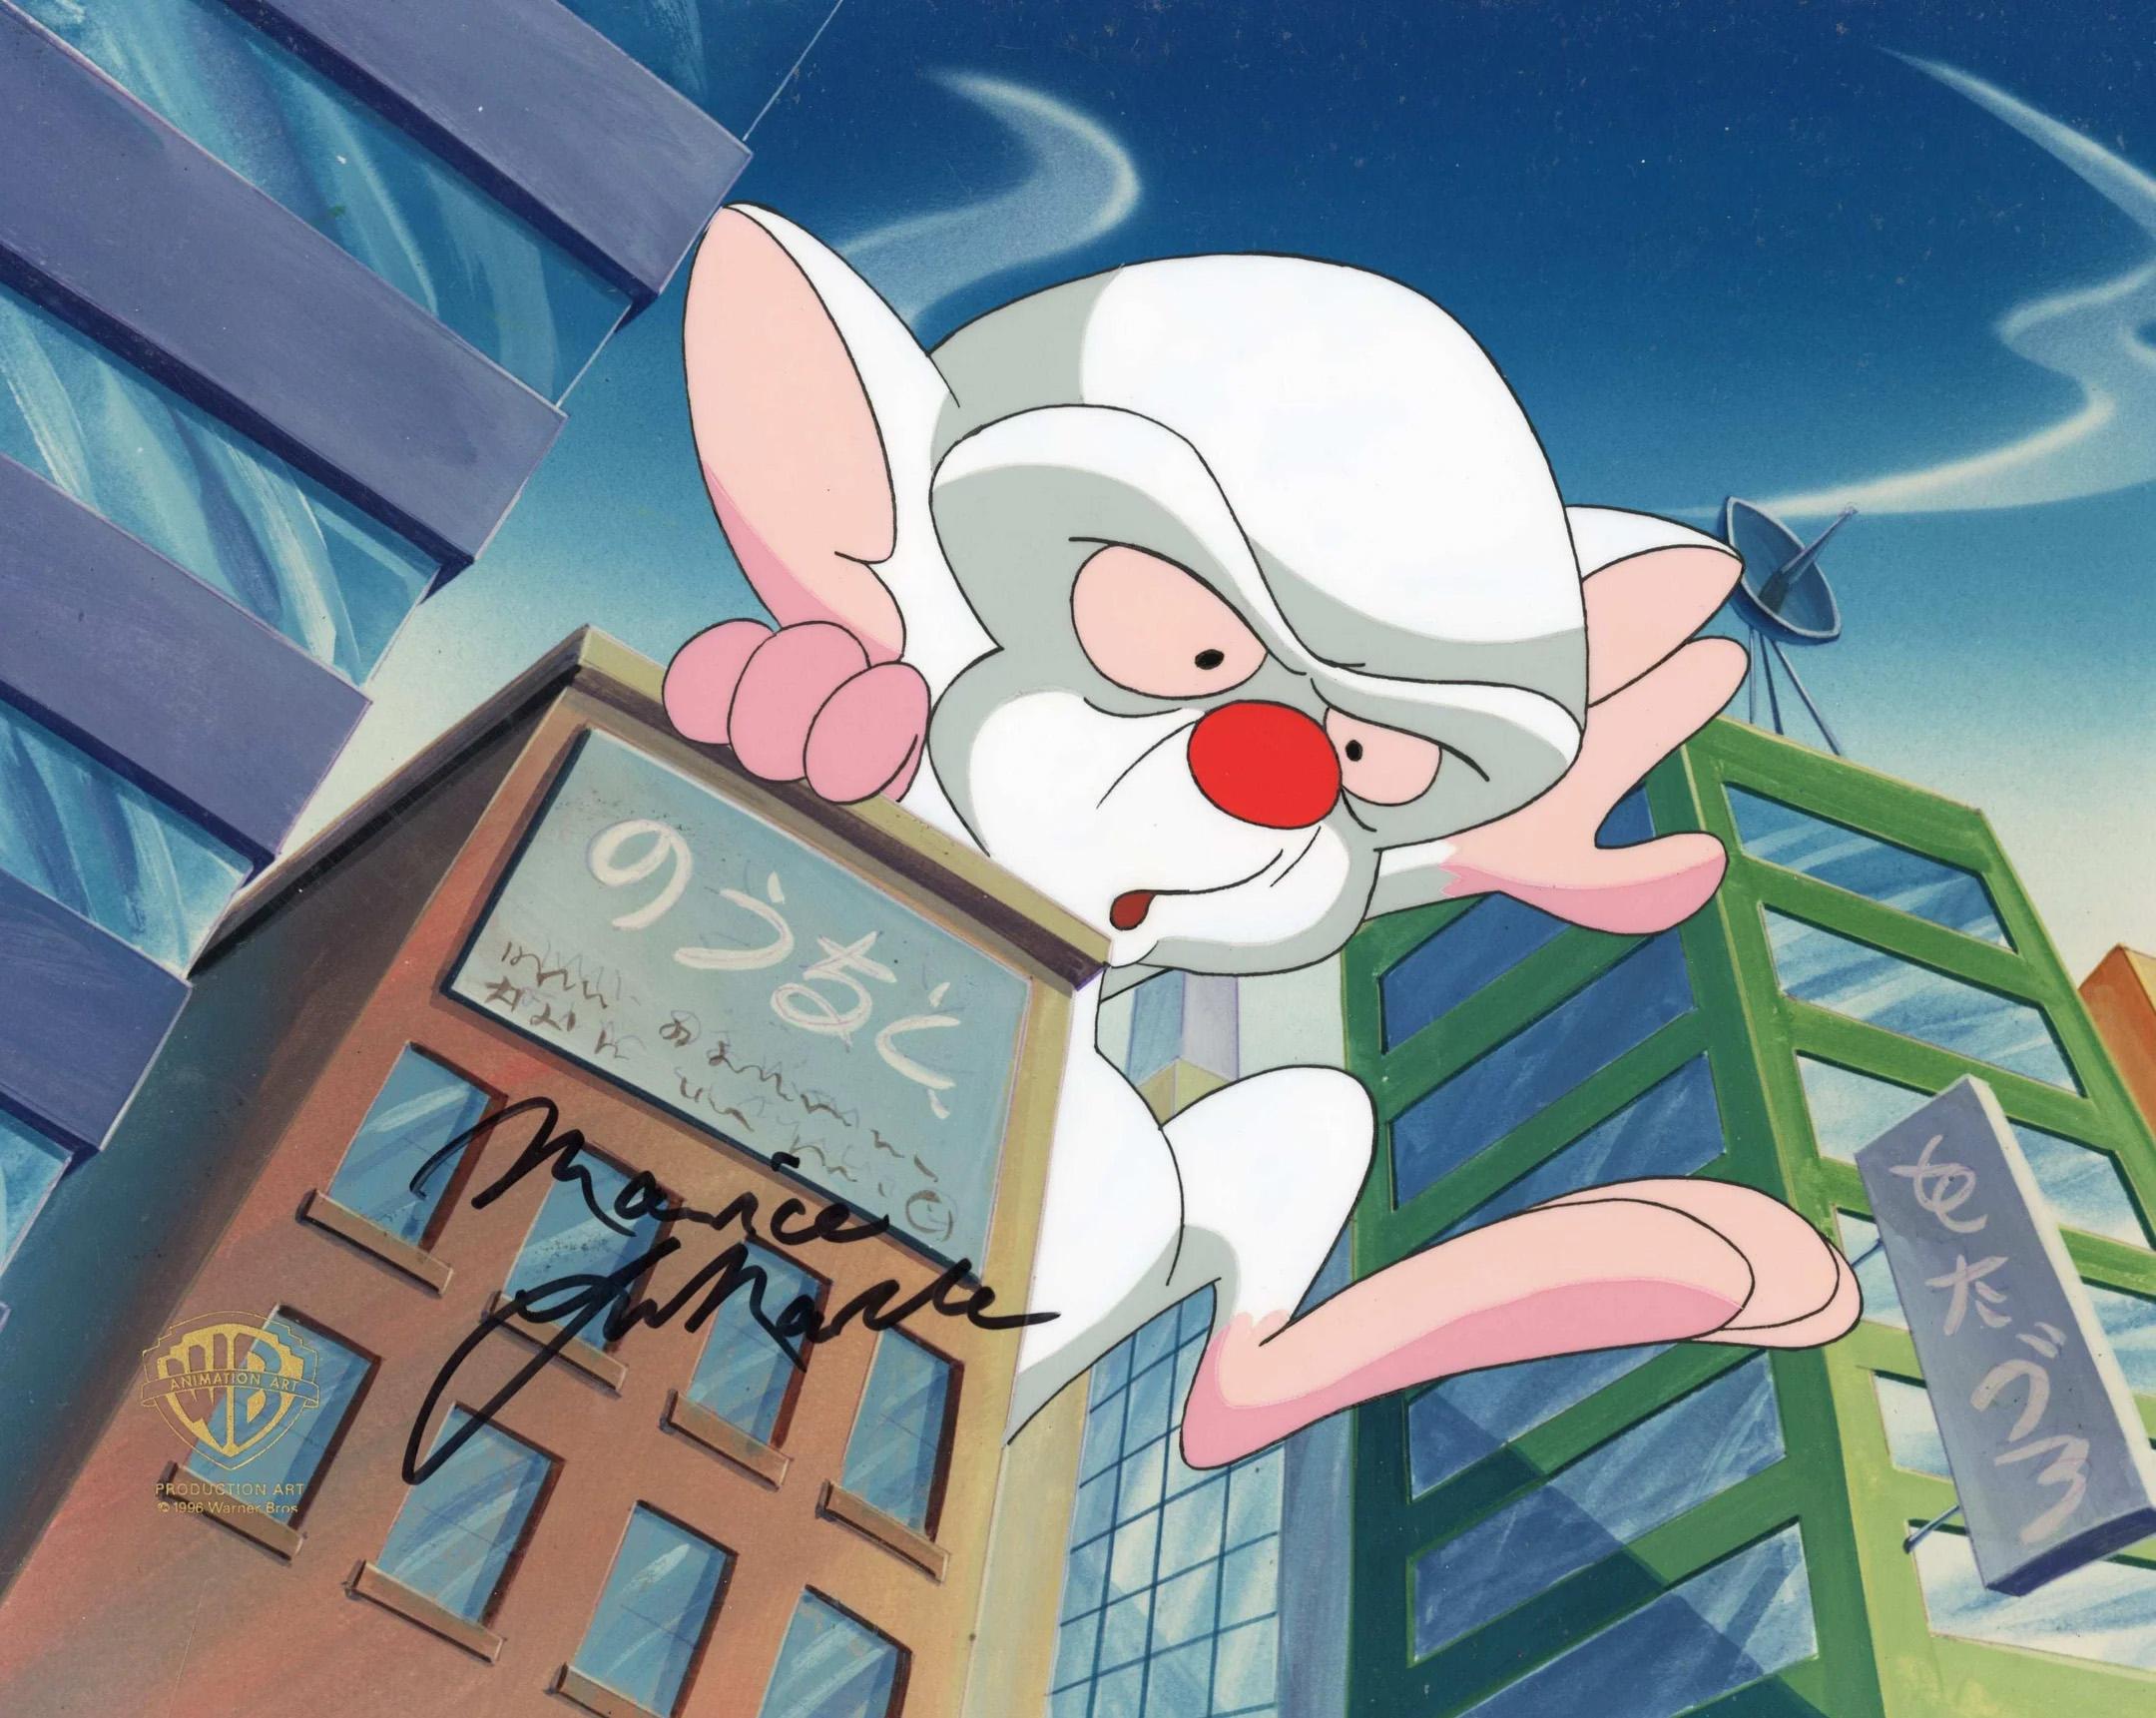 Pinky And The Brain Signed by Maurice LaMarche Original Production Cel: Brain - Art by Warner Bros. Studio Artists